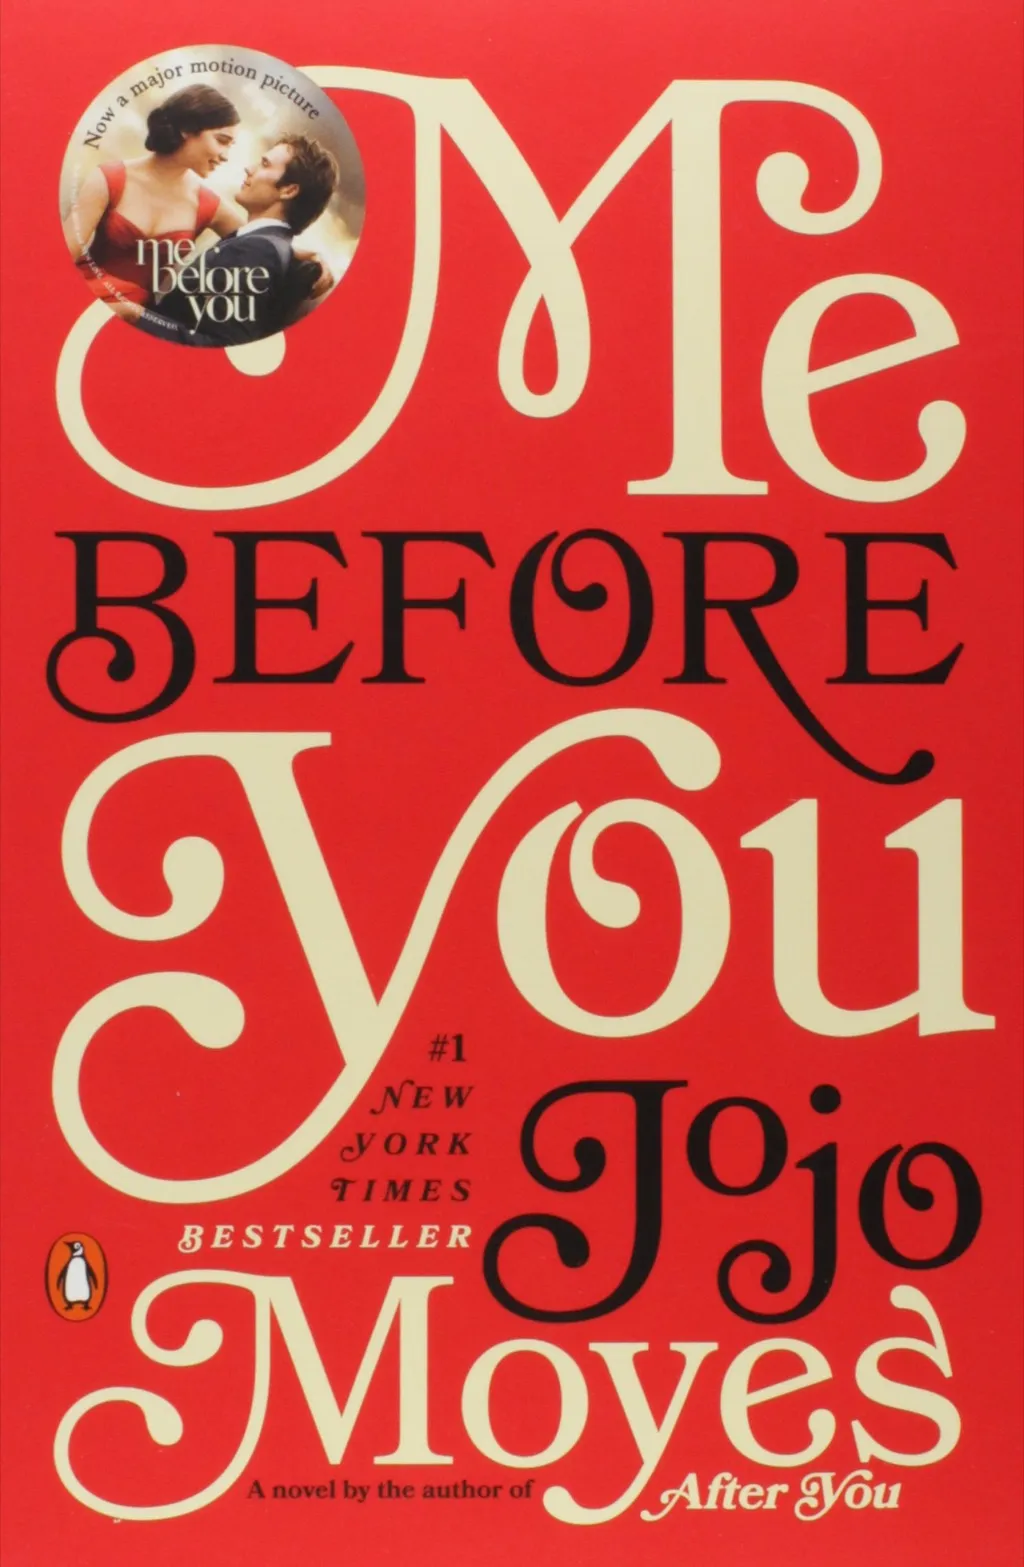 Me Before You books every woman should read in her 40s